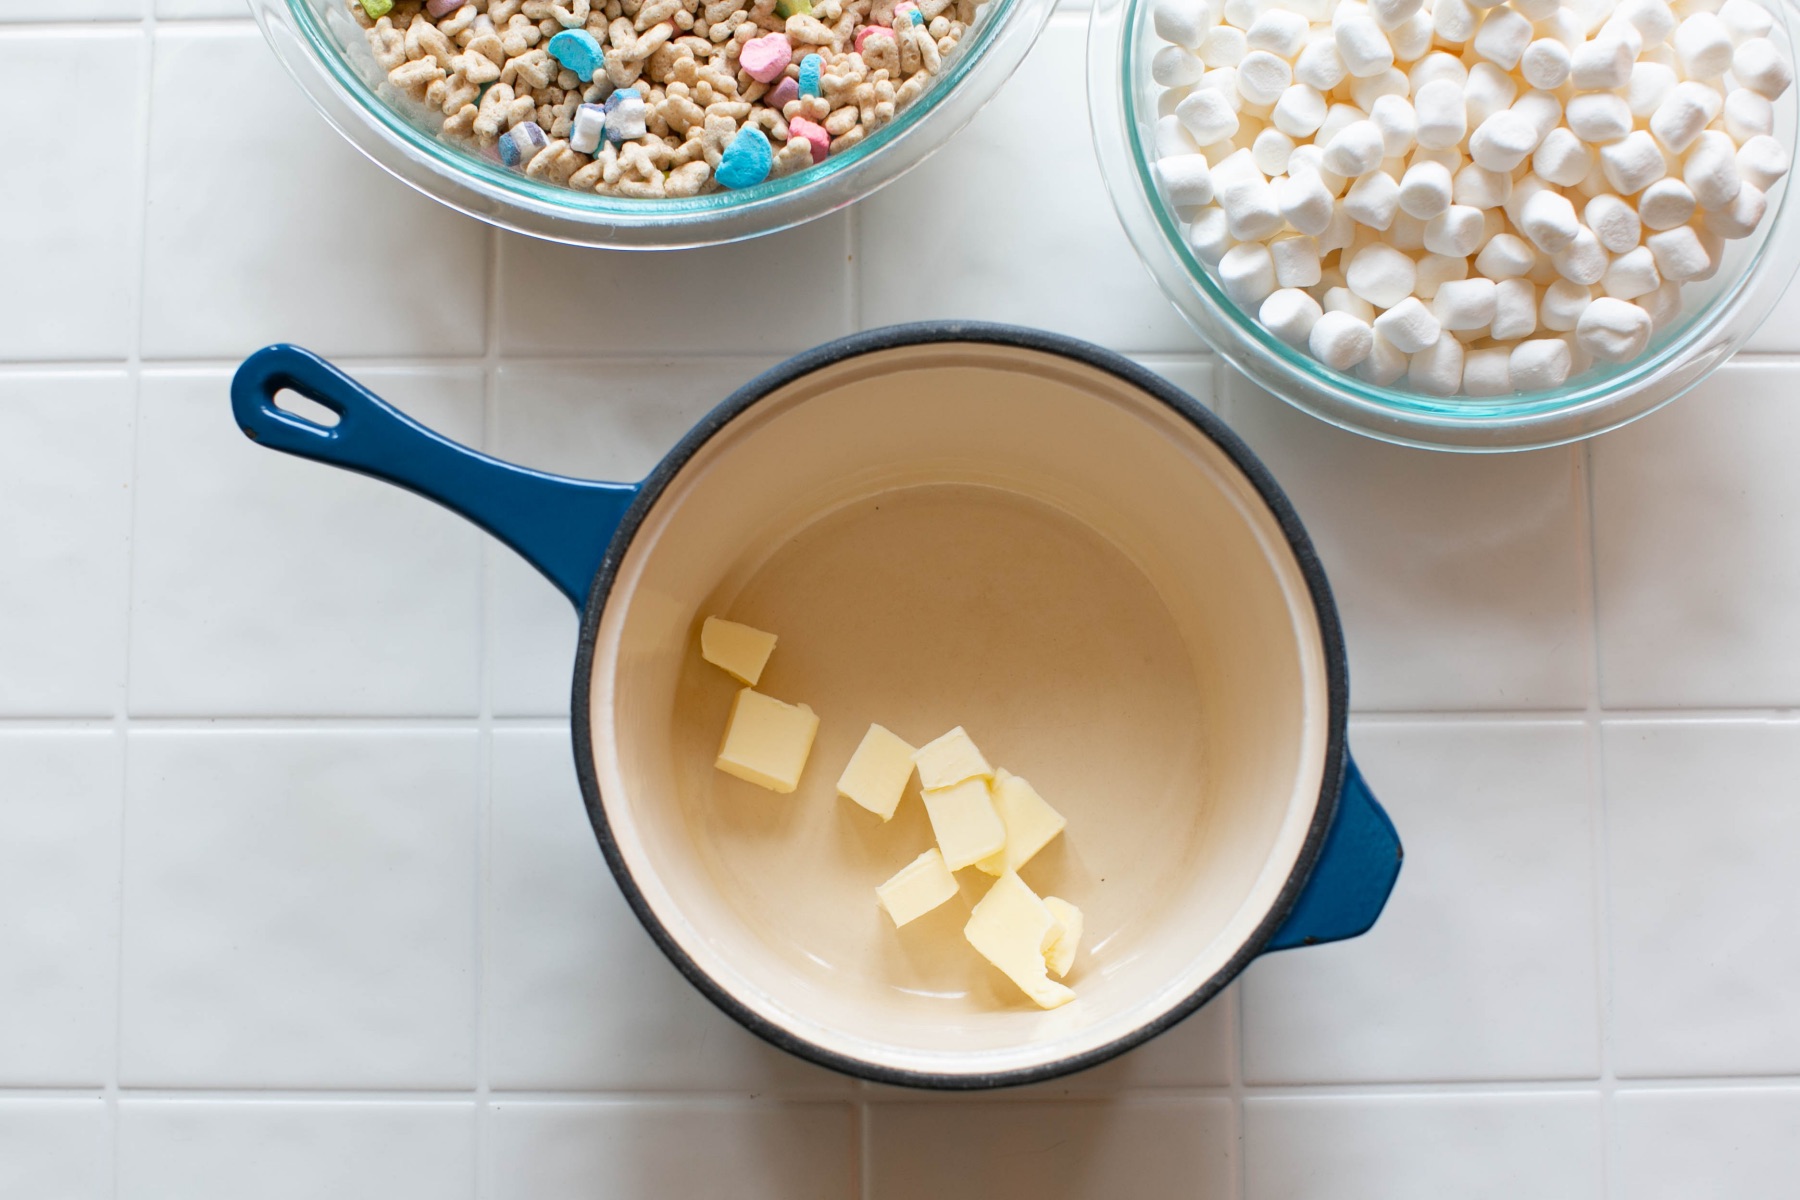 ingredients to make lucky charms marshmallow treats